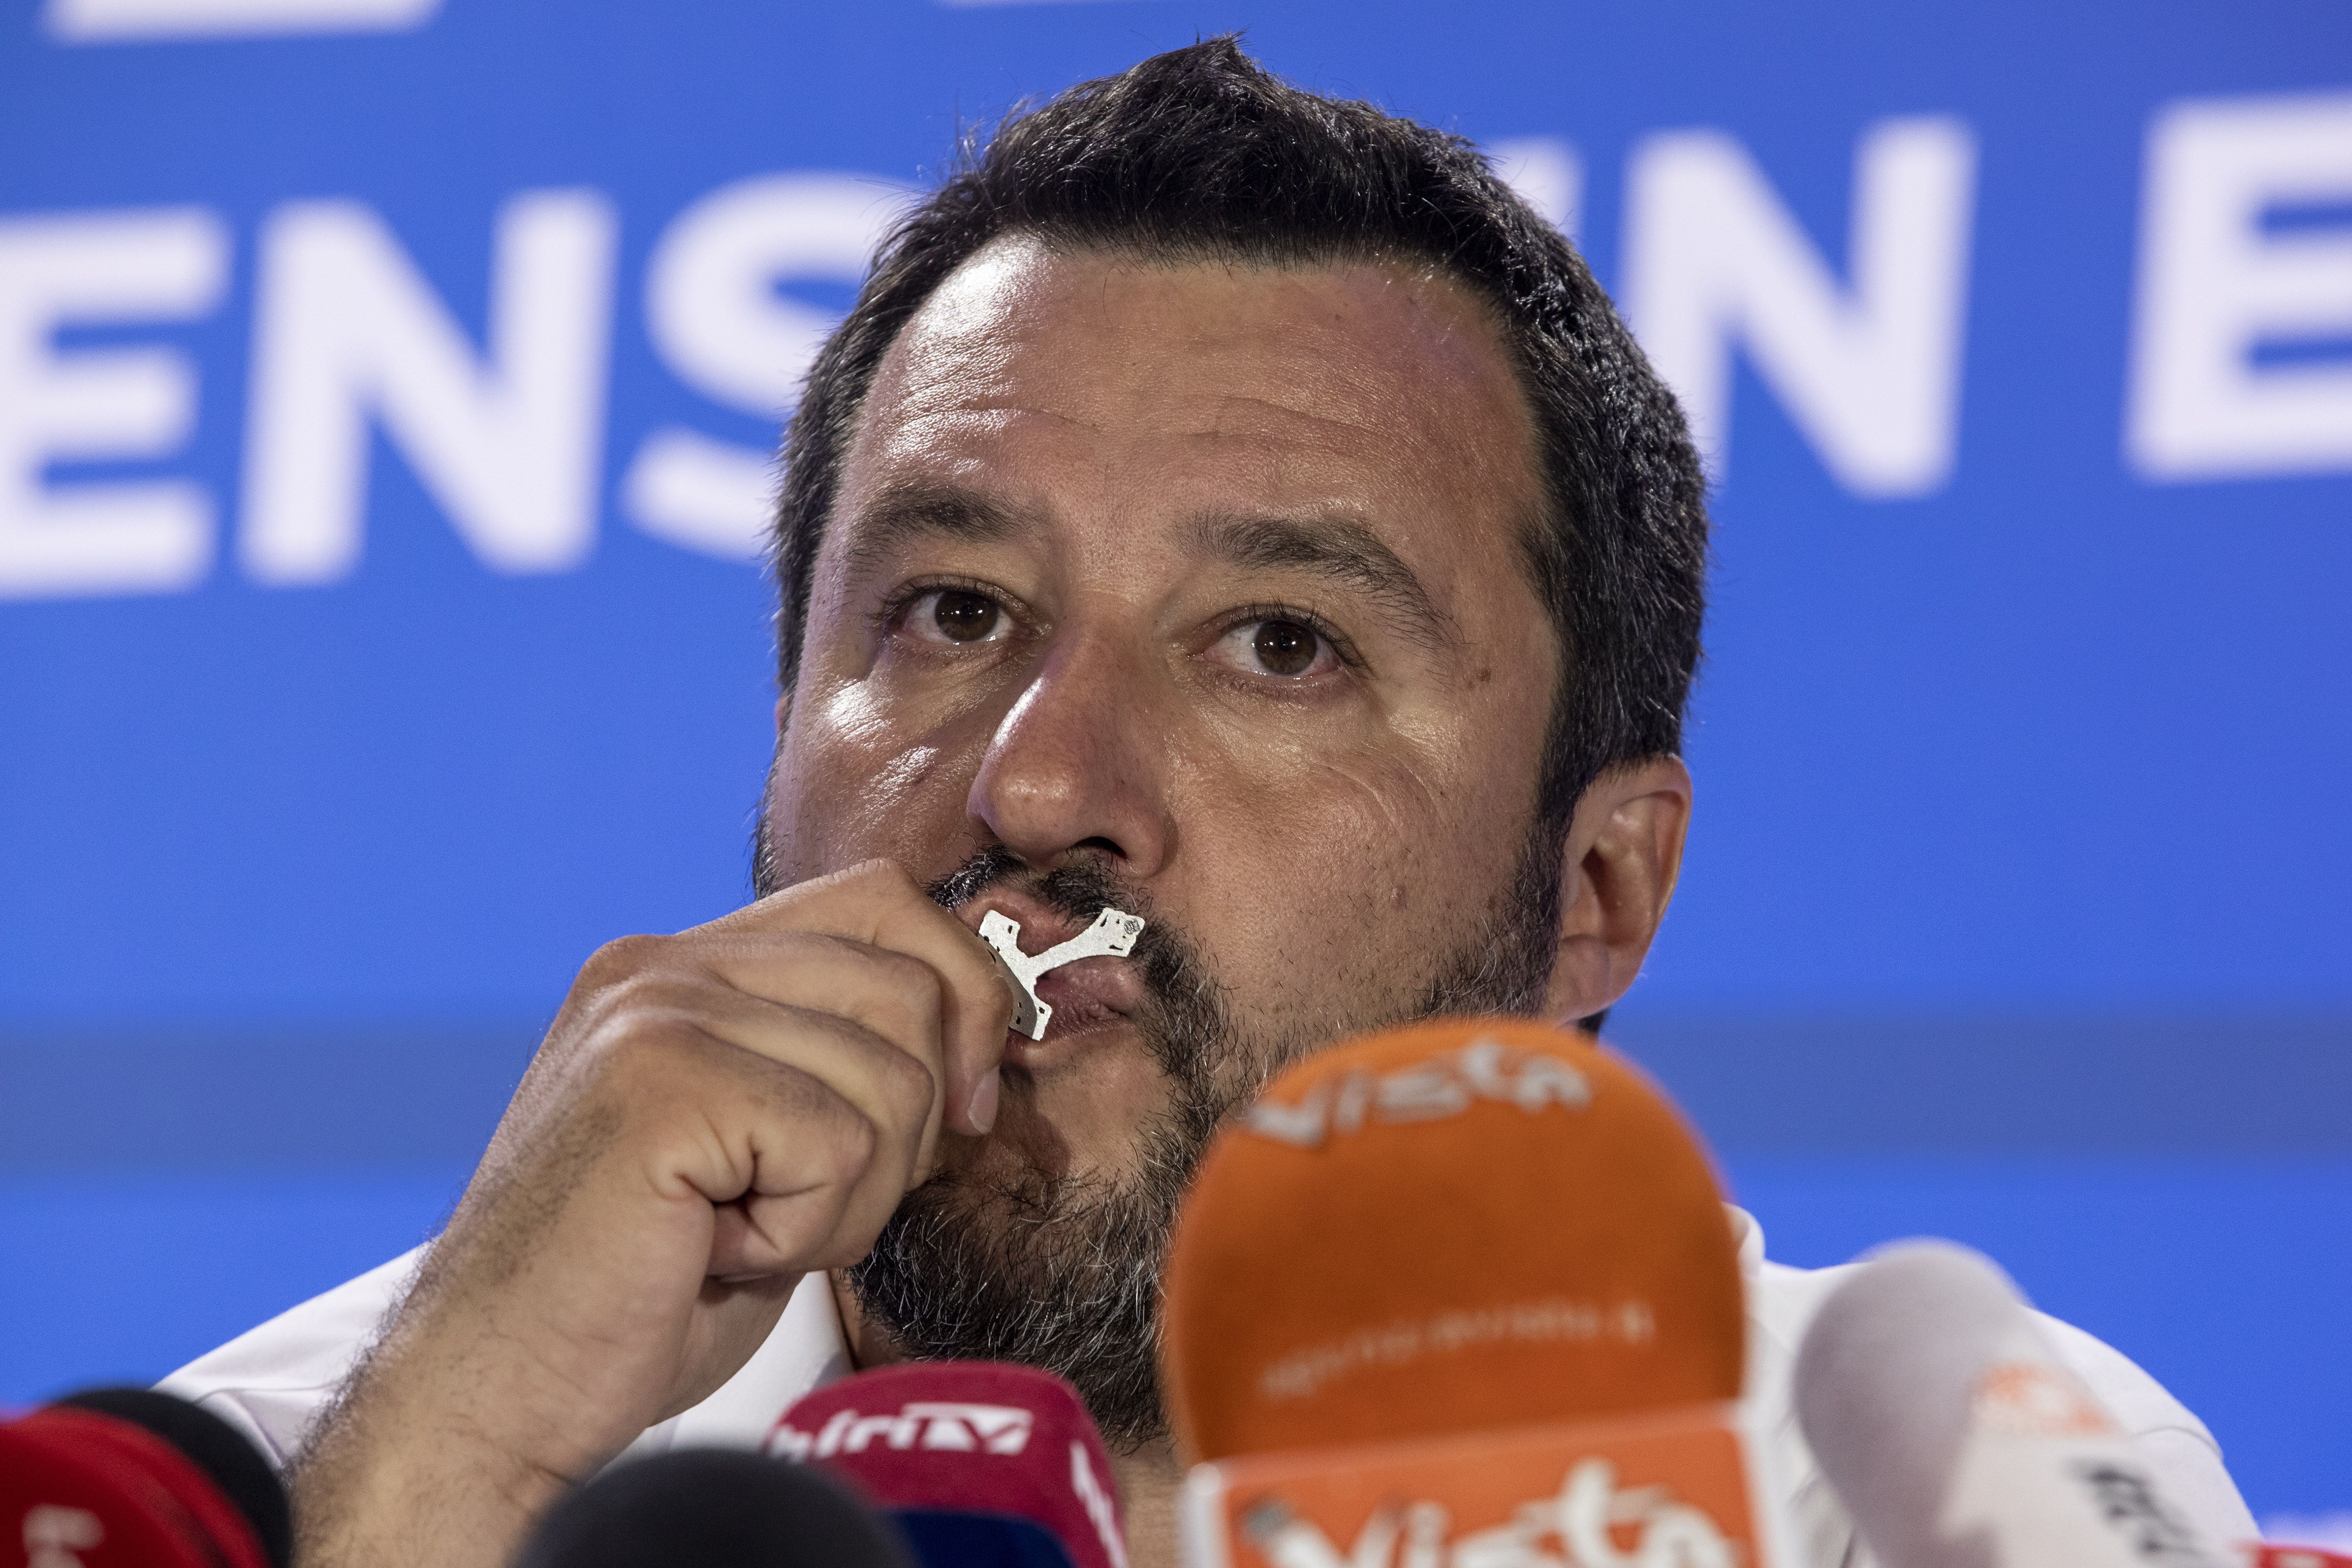 Italy's Deputy Prime Minister and leader of right-wing Lega (League) political party Matteo Salvini in Milan, Italy.